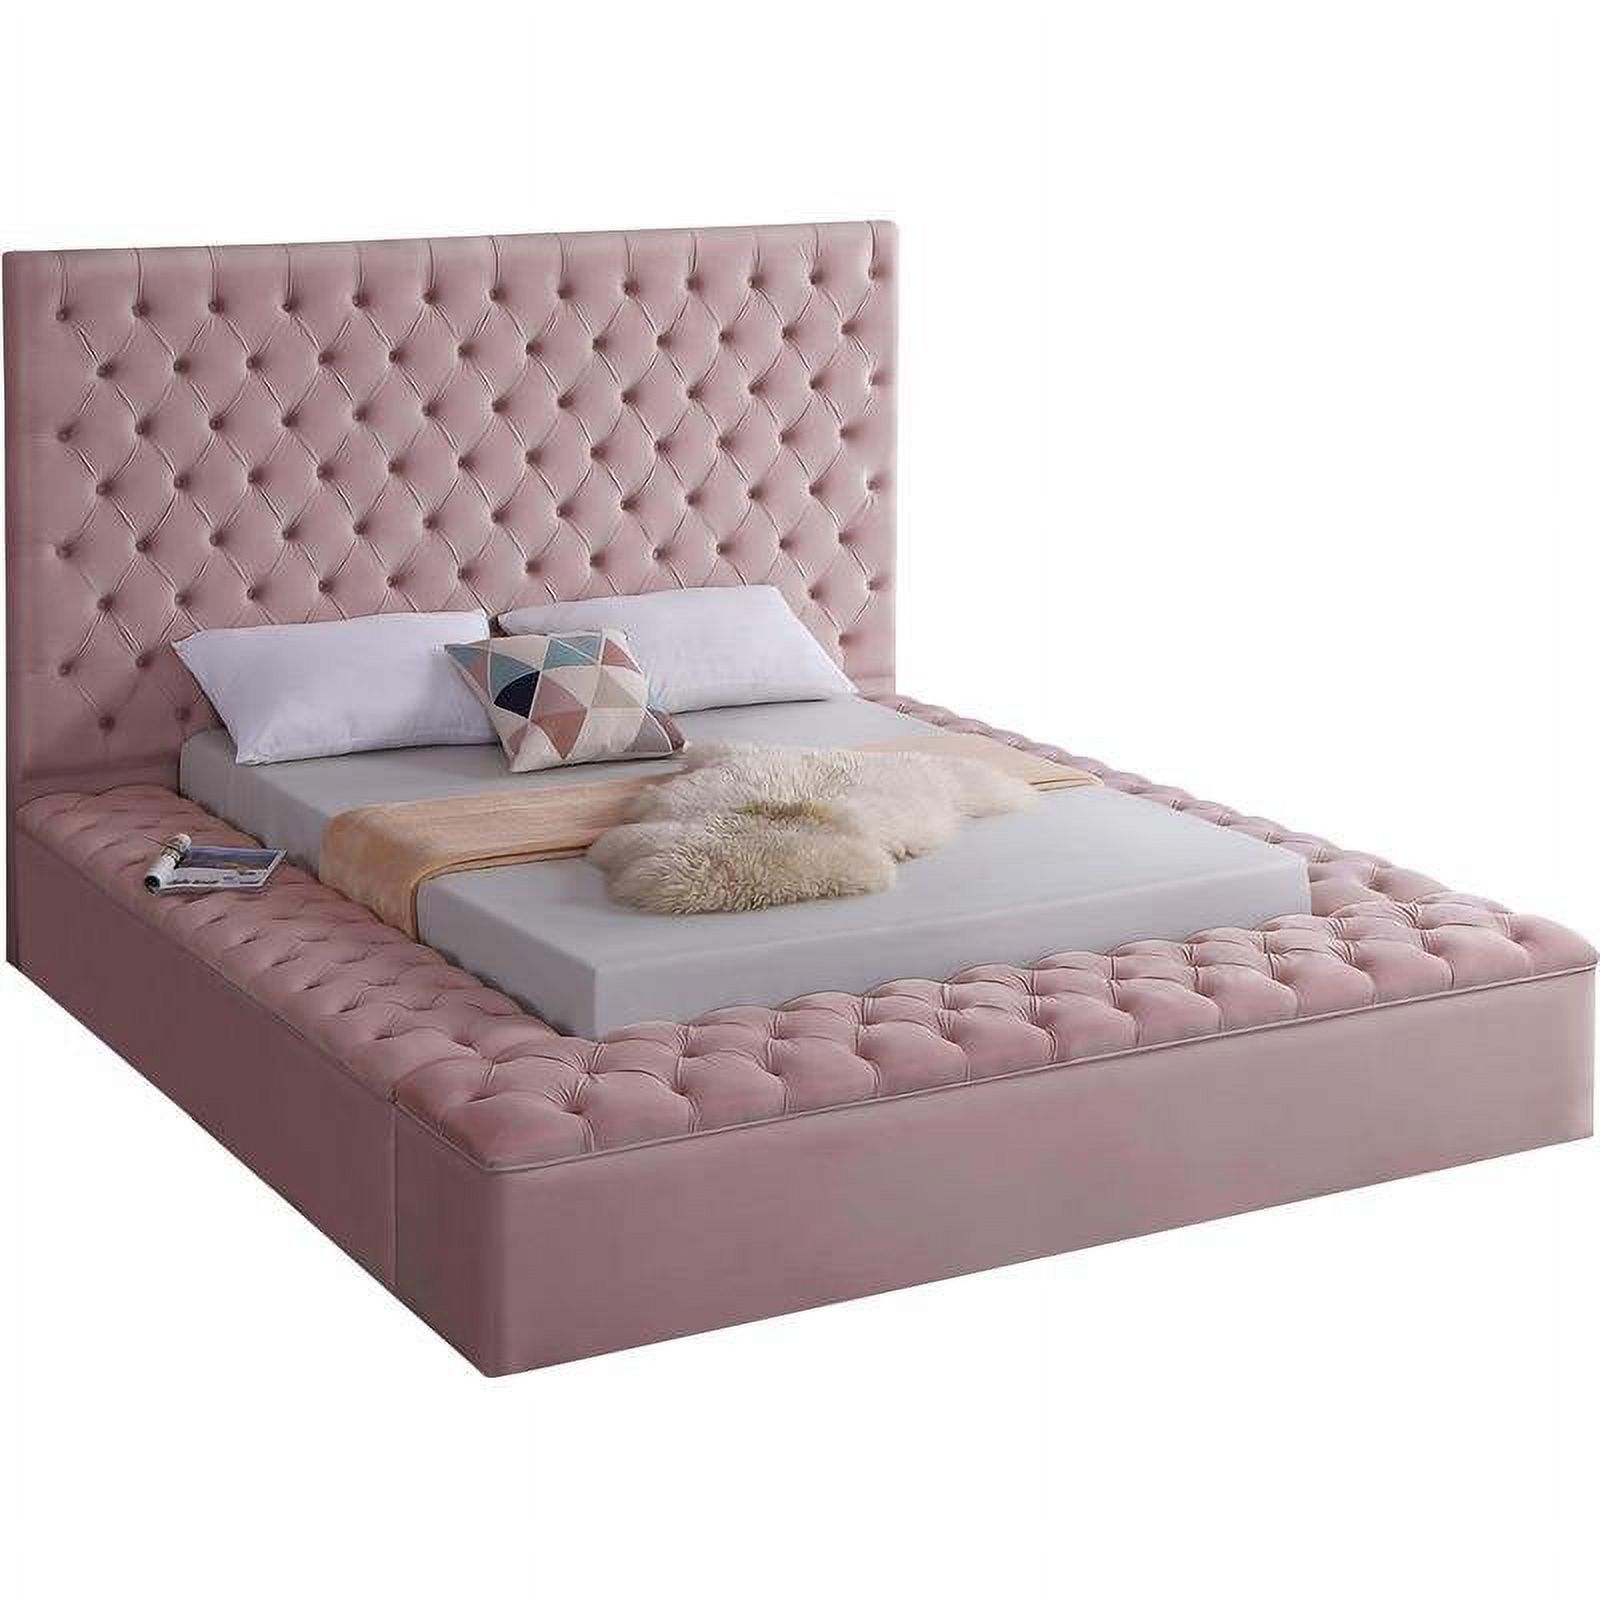 Meridian Furniture Bliss Solid Wood Tufted Velvet King Bed in Pink - image 1 of 6